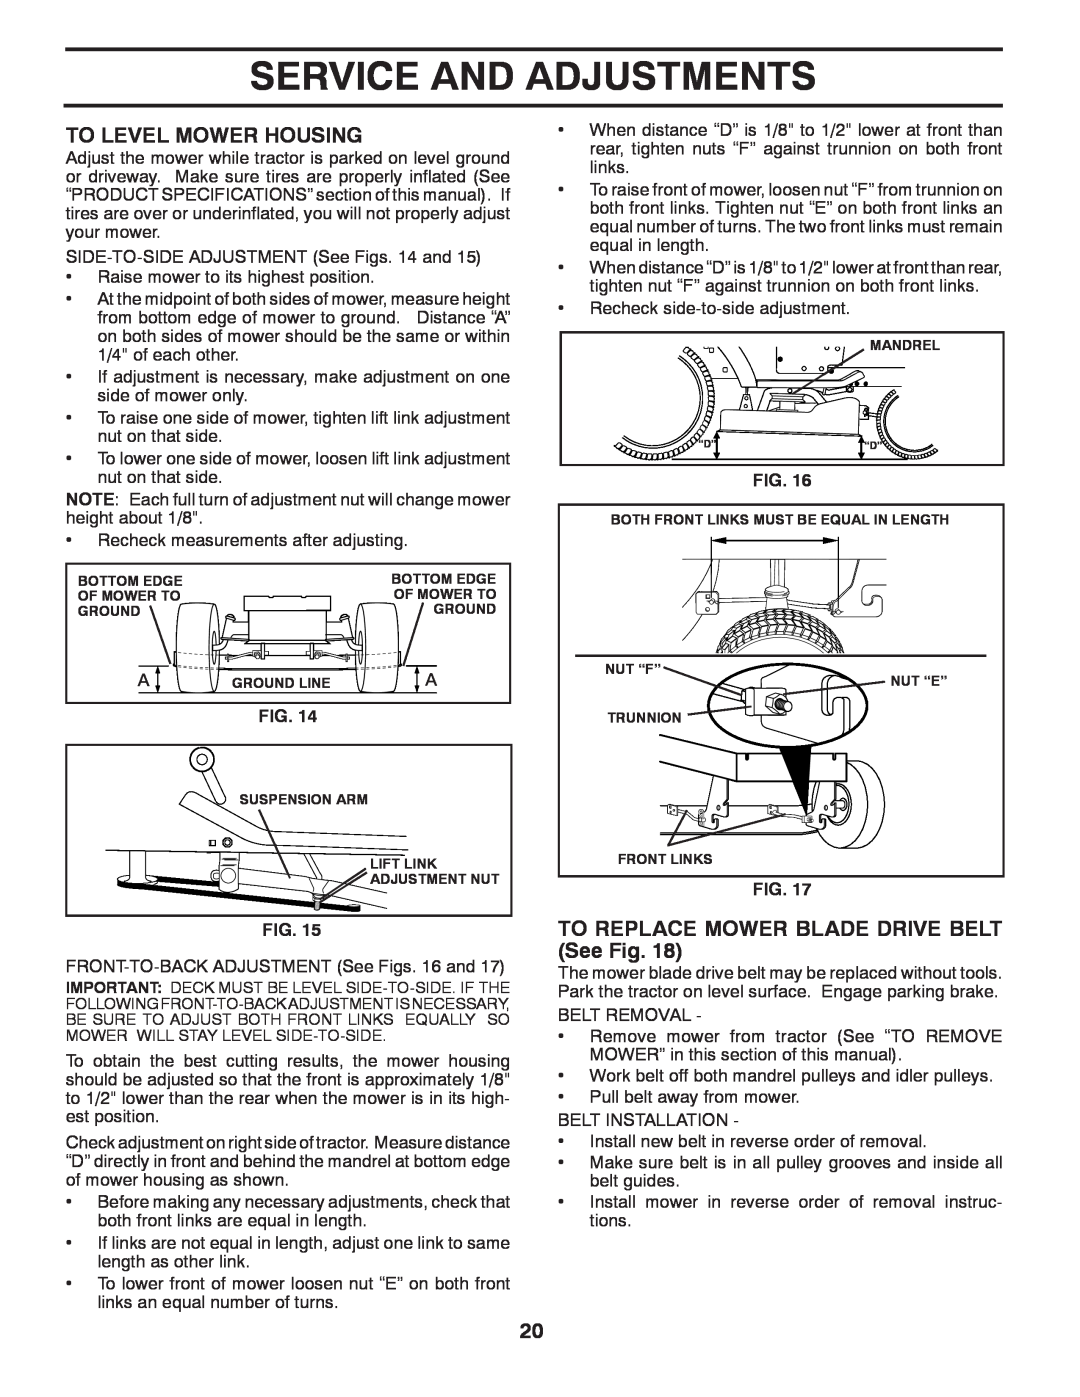 Poulan 96012008300, 418745 manual To Level Mower Housing, TO REPLACE MOWER BLADE DRIVE BELT See Fig, Service And Adjustments 